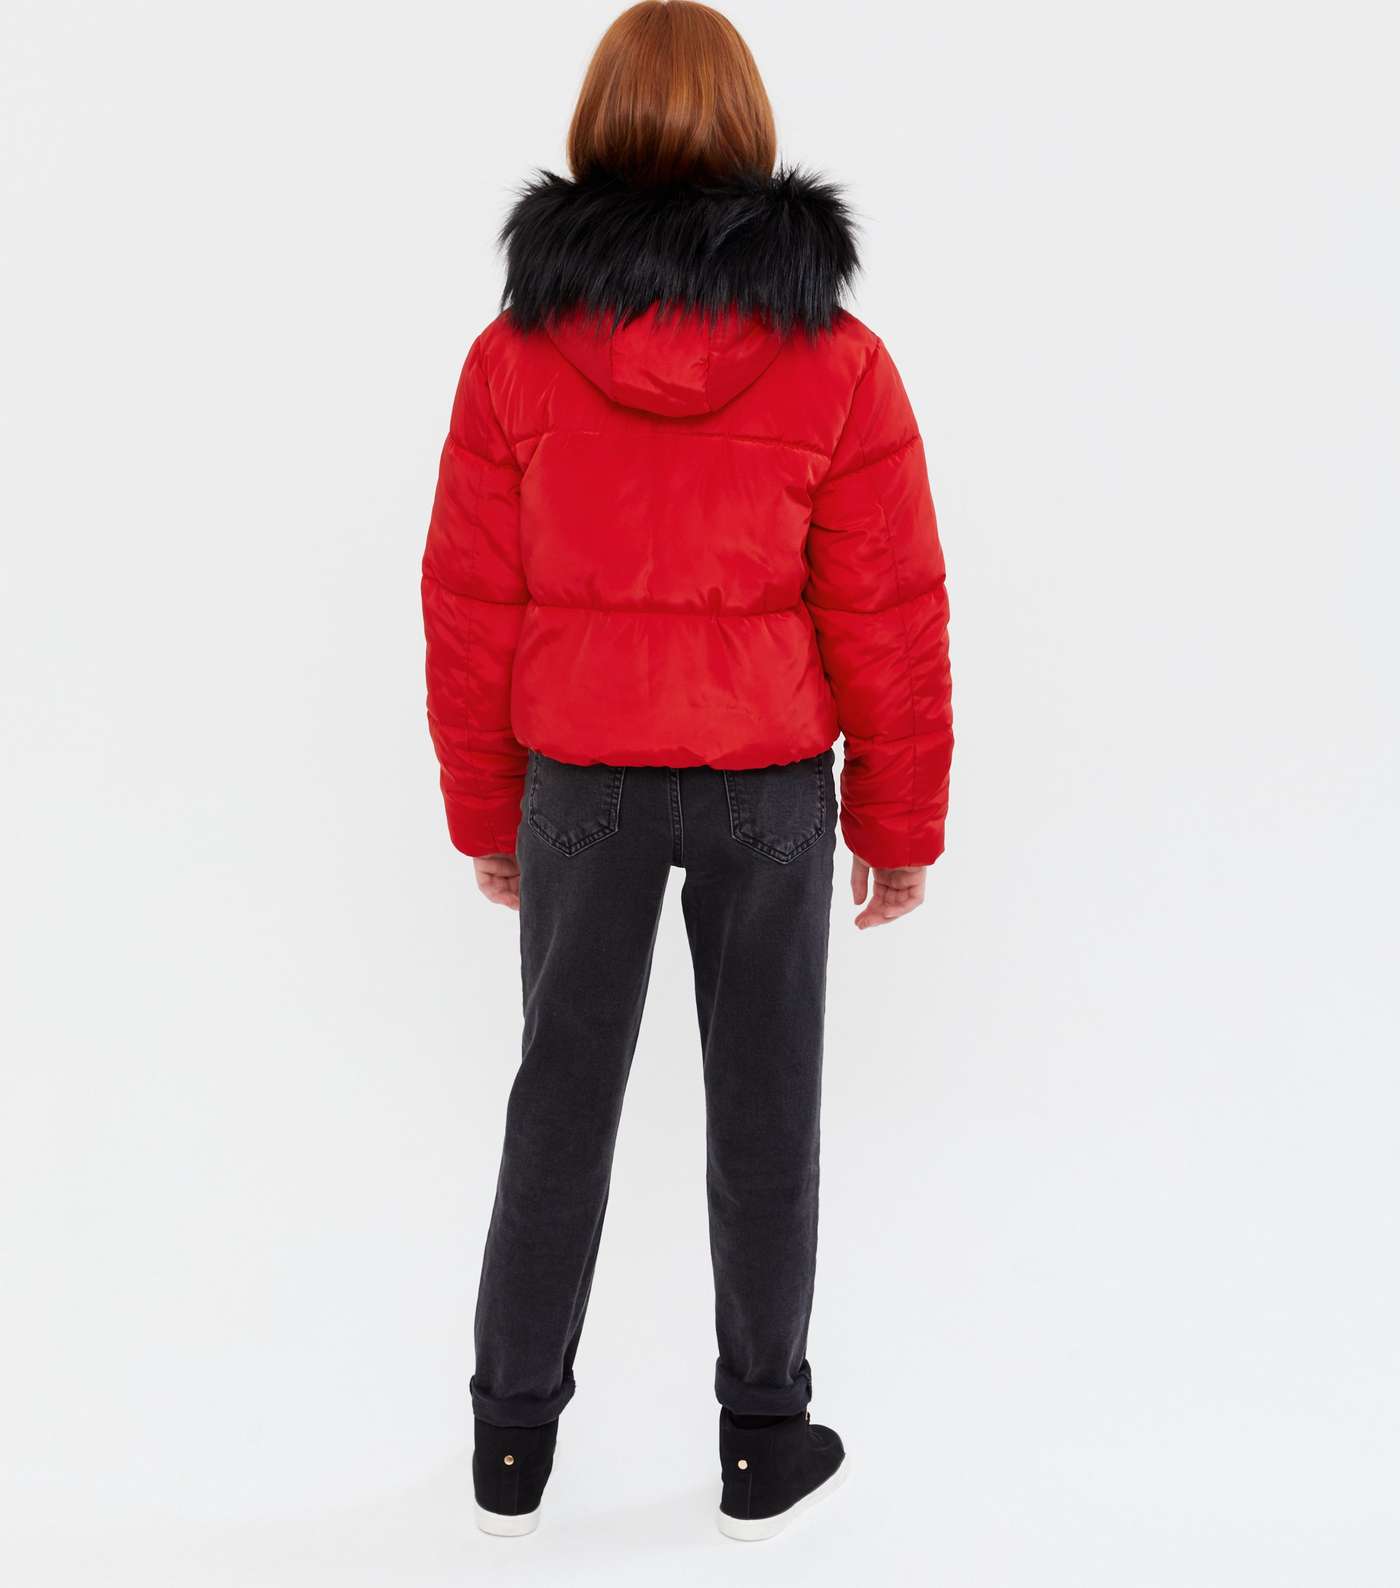 Girls Red Faux Fur Hooded Puffer Jacket Image 4